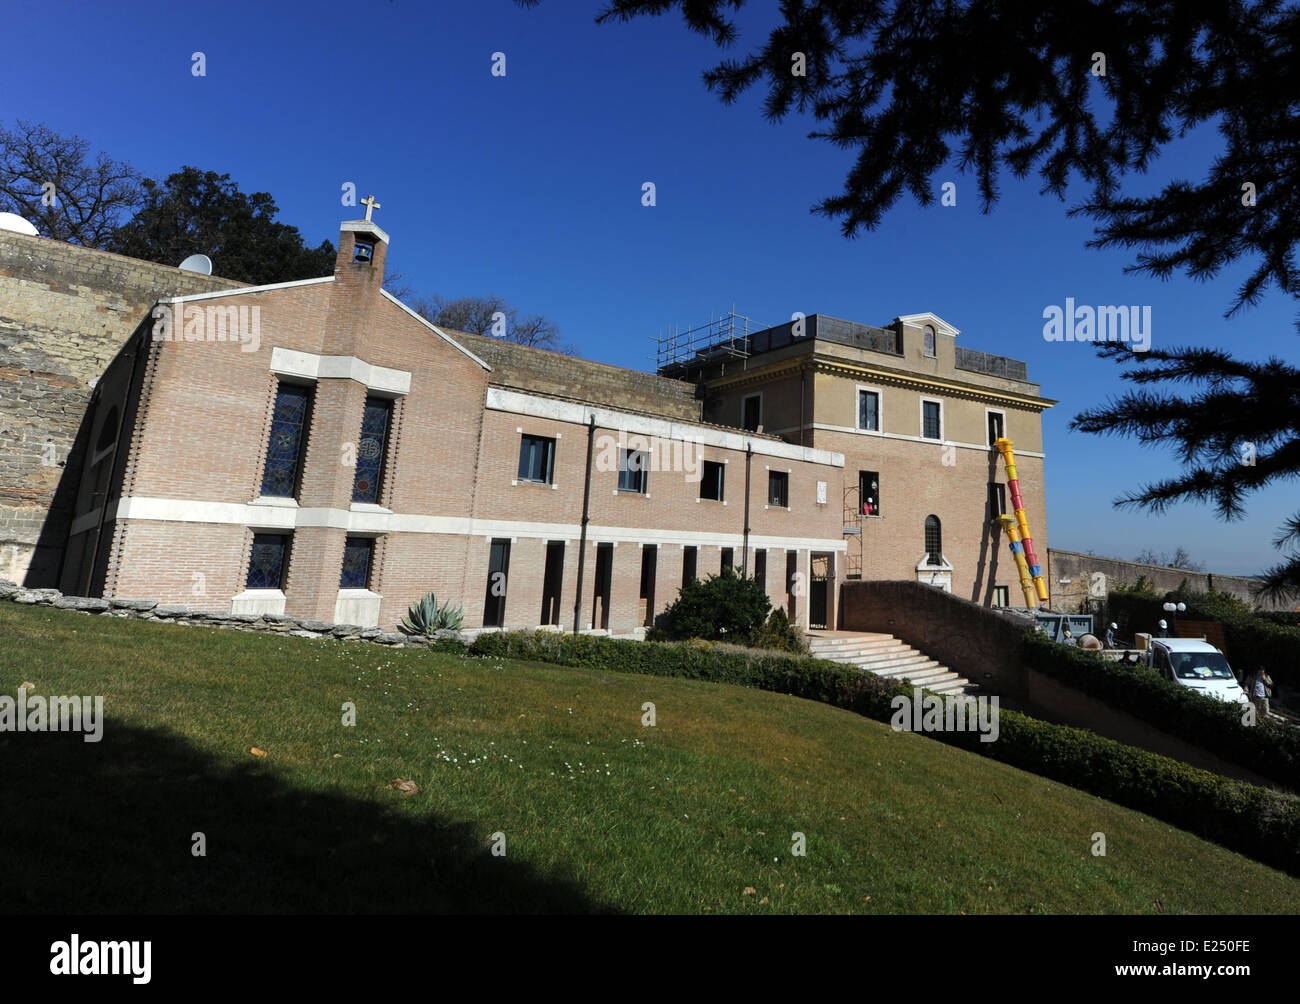 The 'Mater Ecclesiae' monastery in the Vatican gardens where Pope Benedict XVI plans to move after his resignation. The monastery is currently undergoing renovations.  Featuring: Mater Ecclesiae monastery Where: Rome, Italy When: 19 Feb 2013 Stock Photo